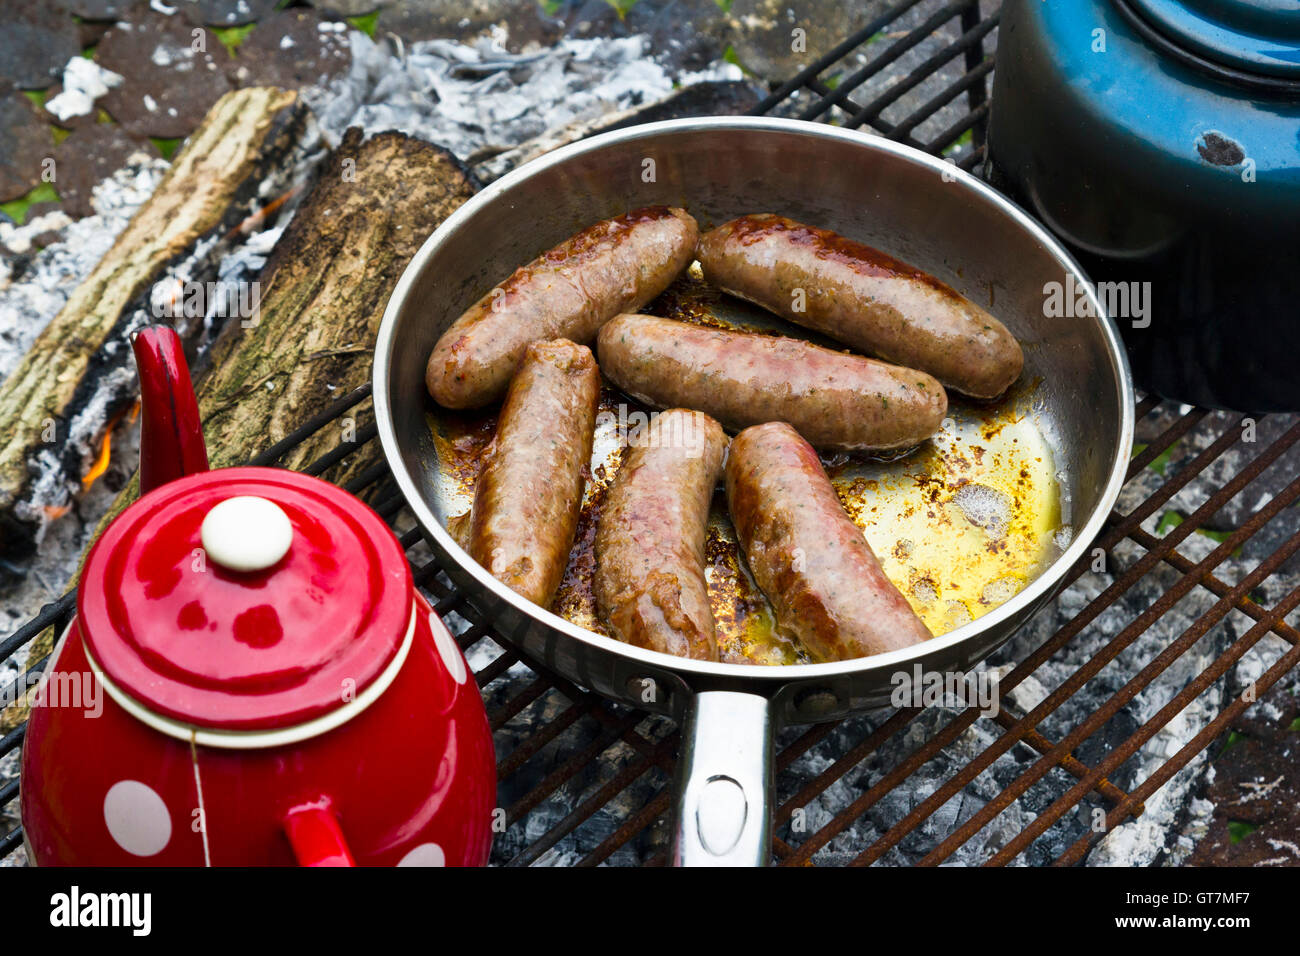 Sausages cooking on a camp fire Stock Photo